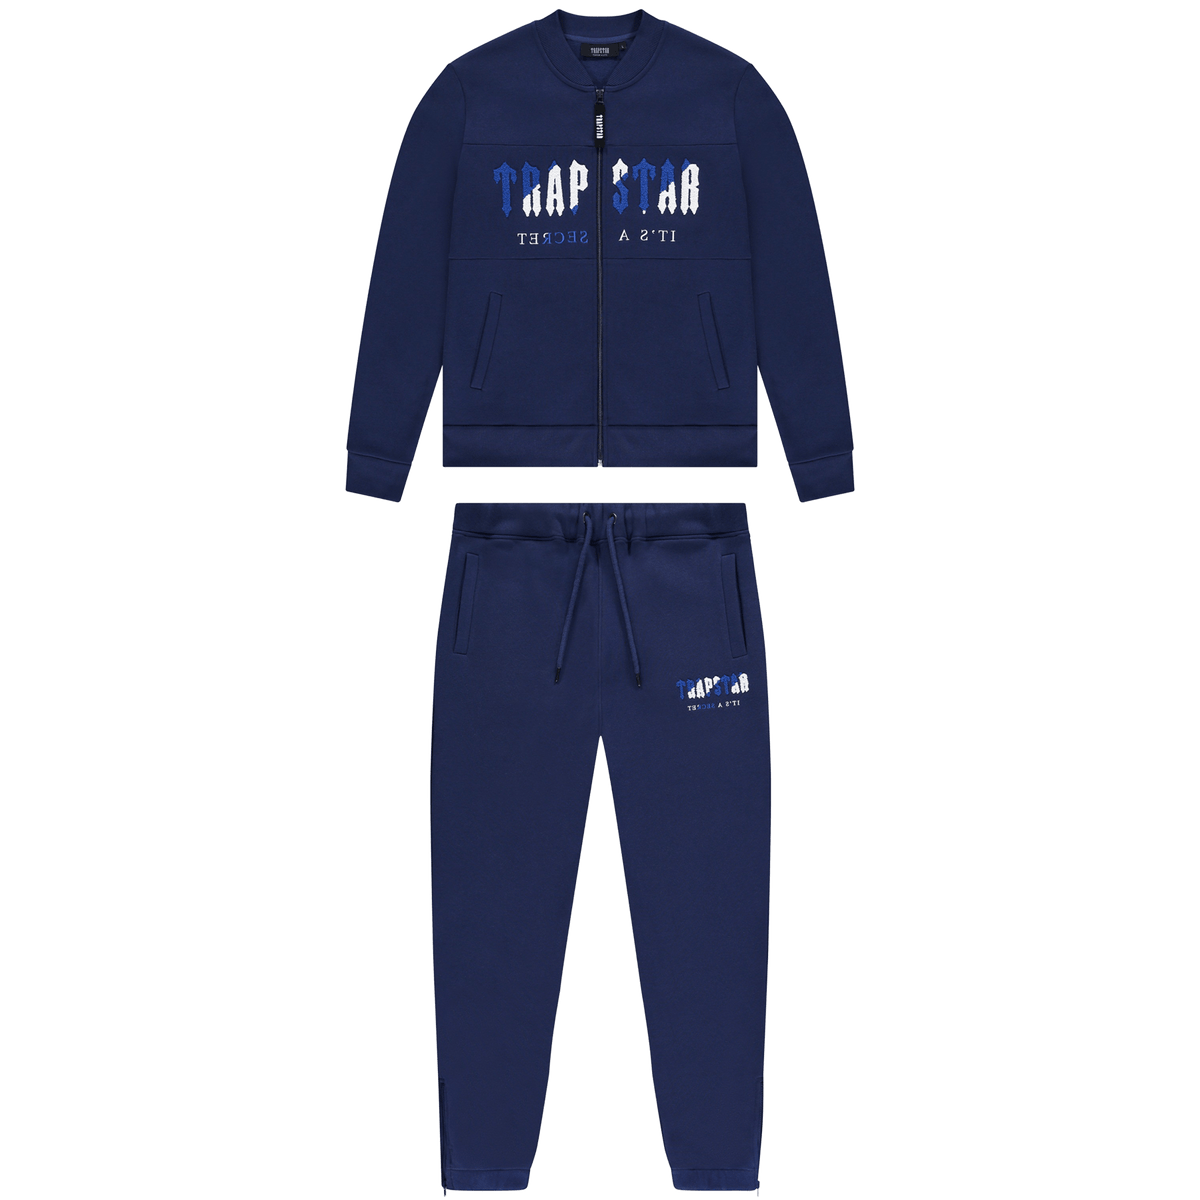 Trapstar Chenille Decoded Zip Tracksuit-Navy/Dazzling Blue/Black - Kick Game